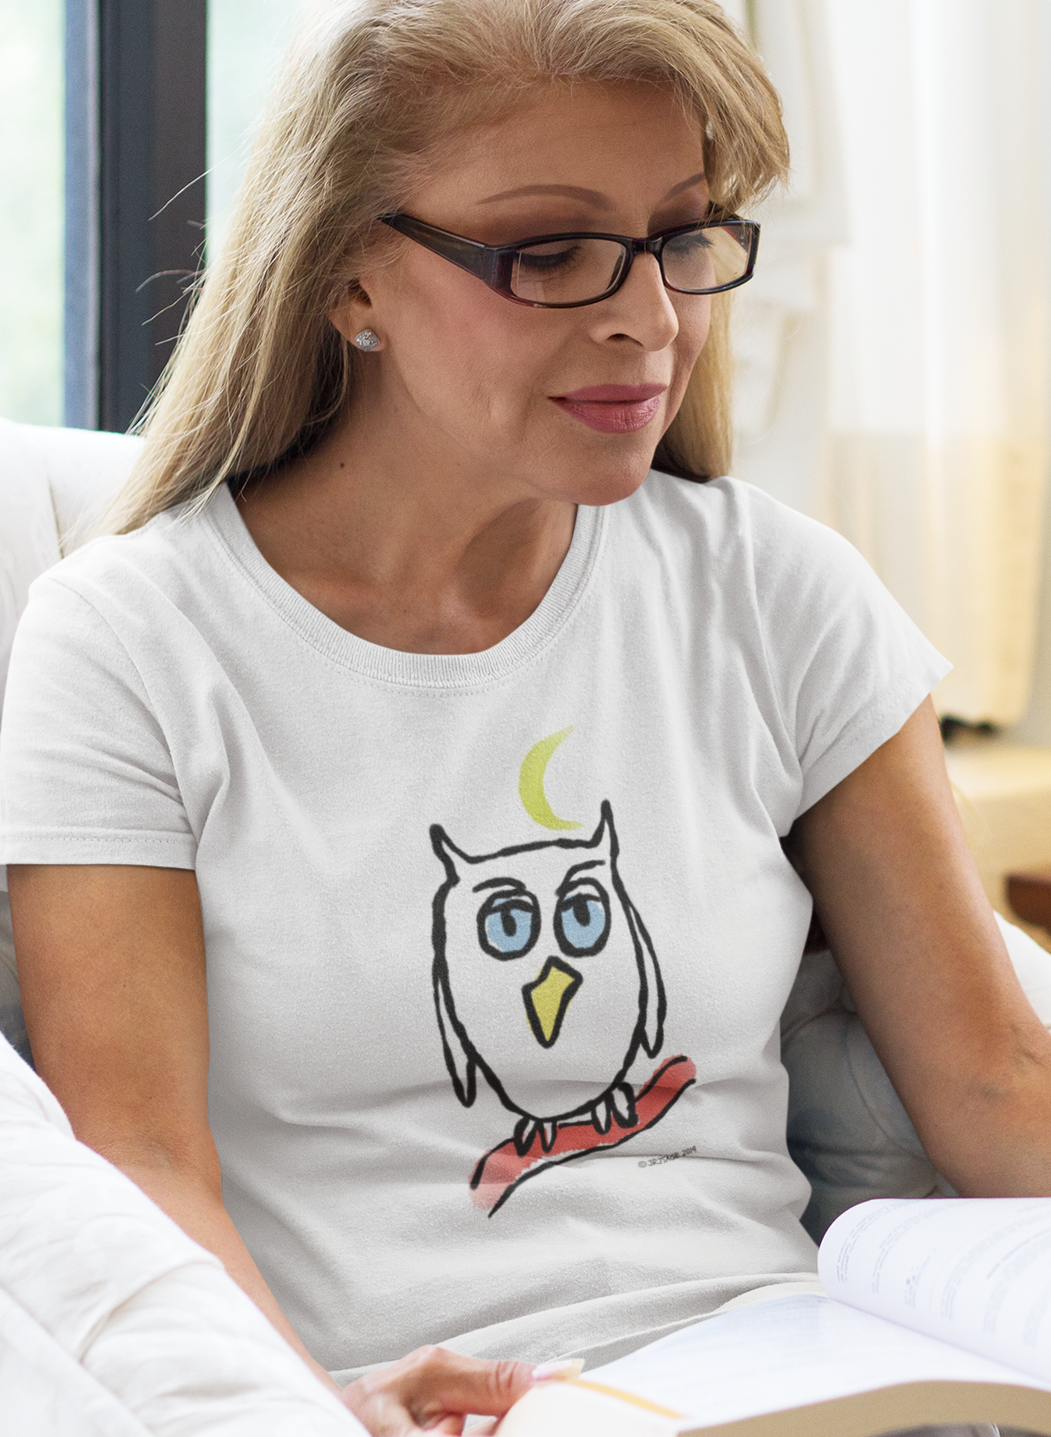 Owl T-shirts - Woman wearing a classic white vegan cotton Night Owl T-shirt design by Hector and Bone